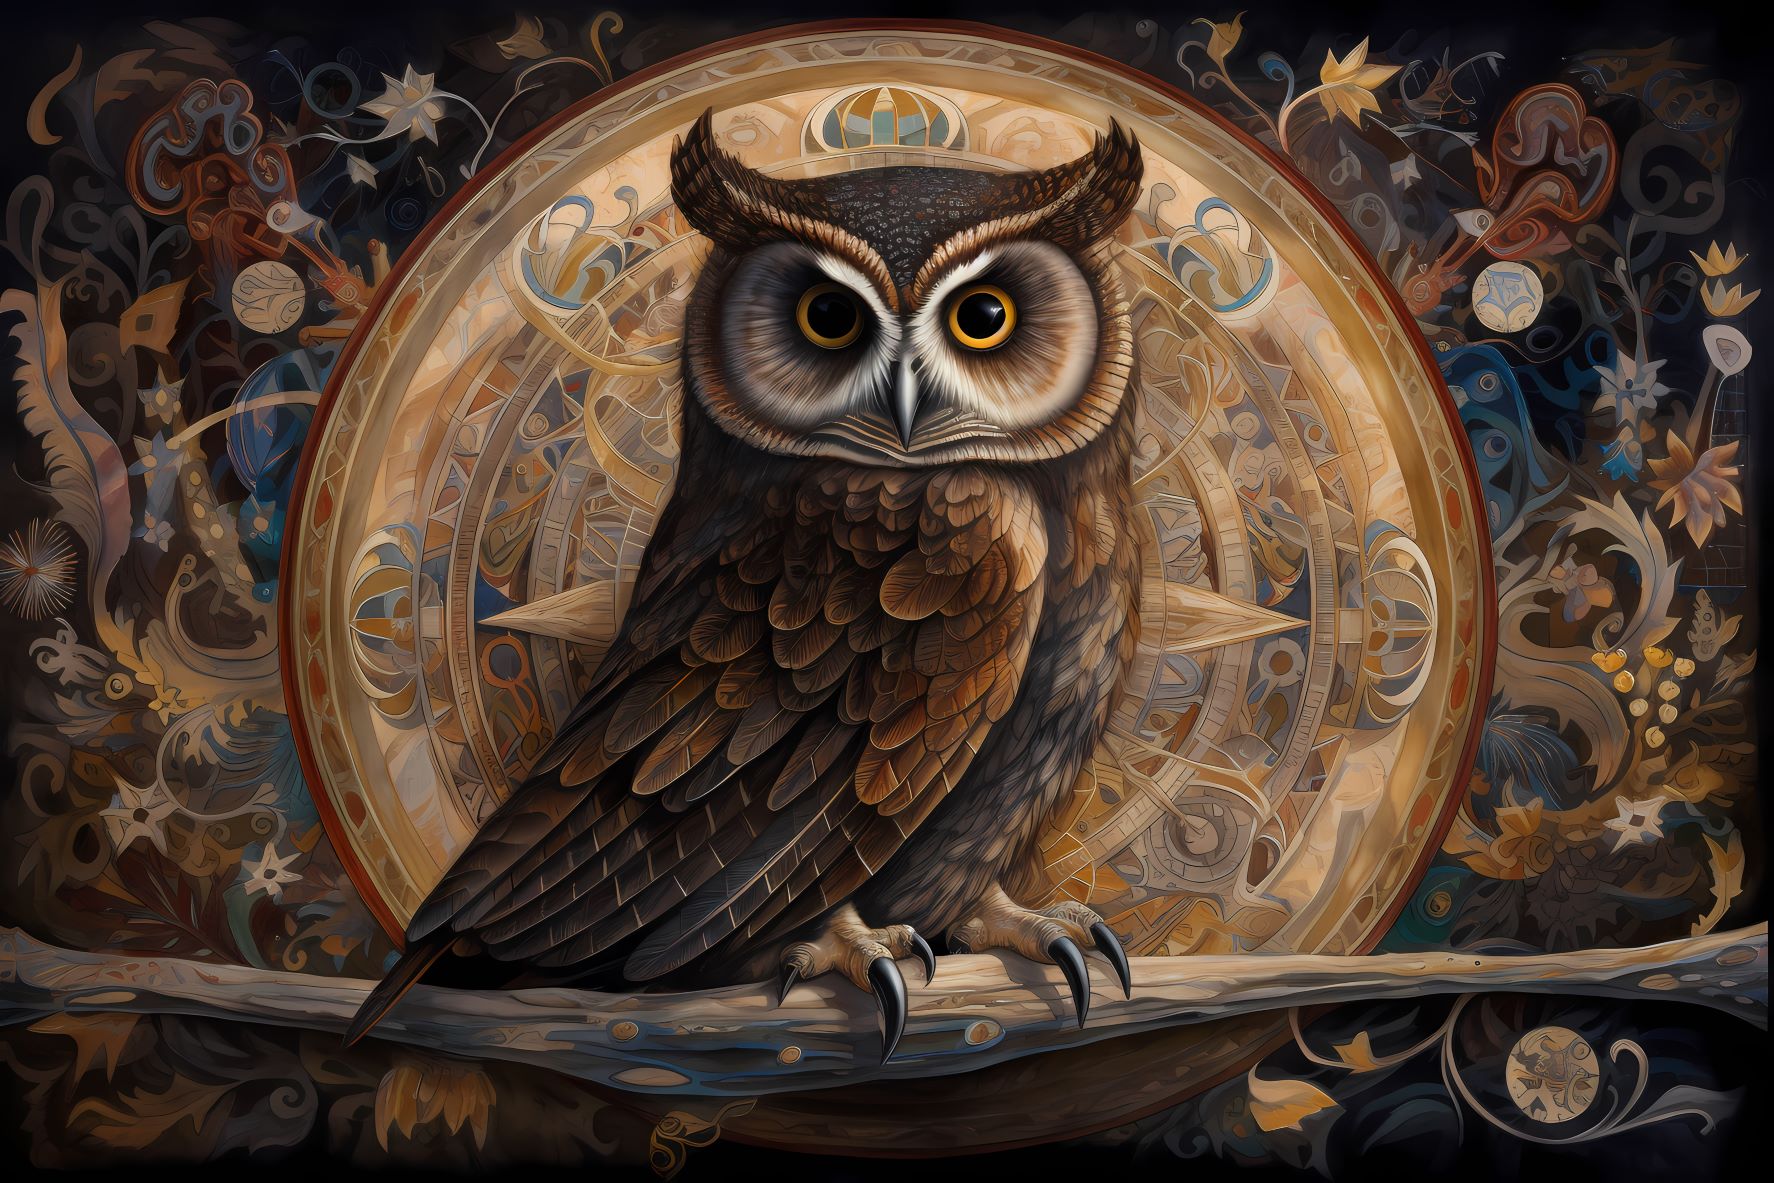 Learn more about Owl Symbolism